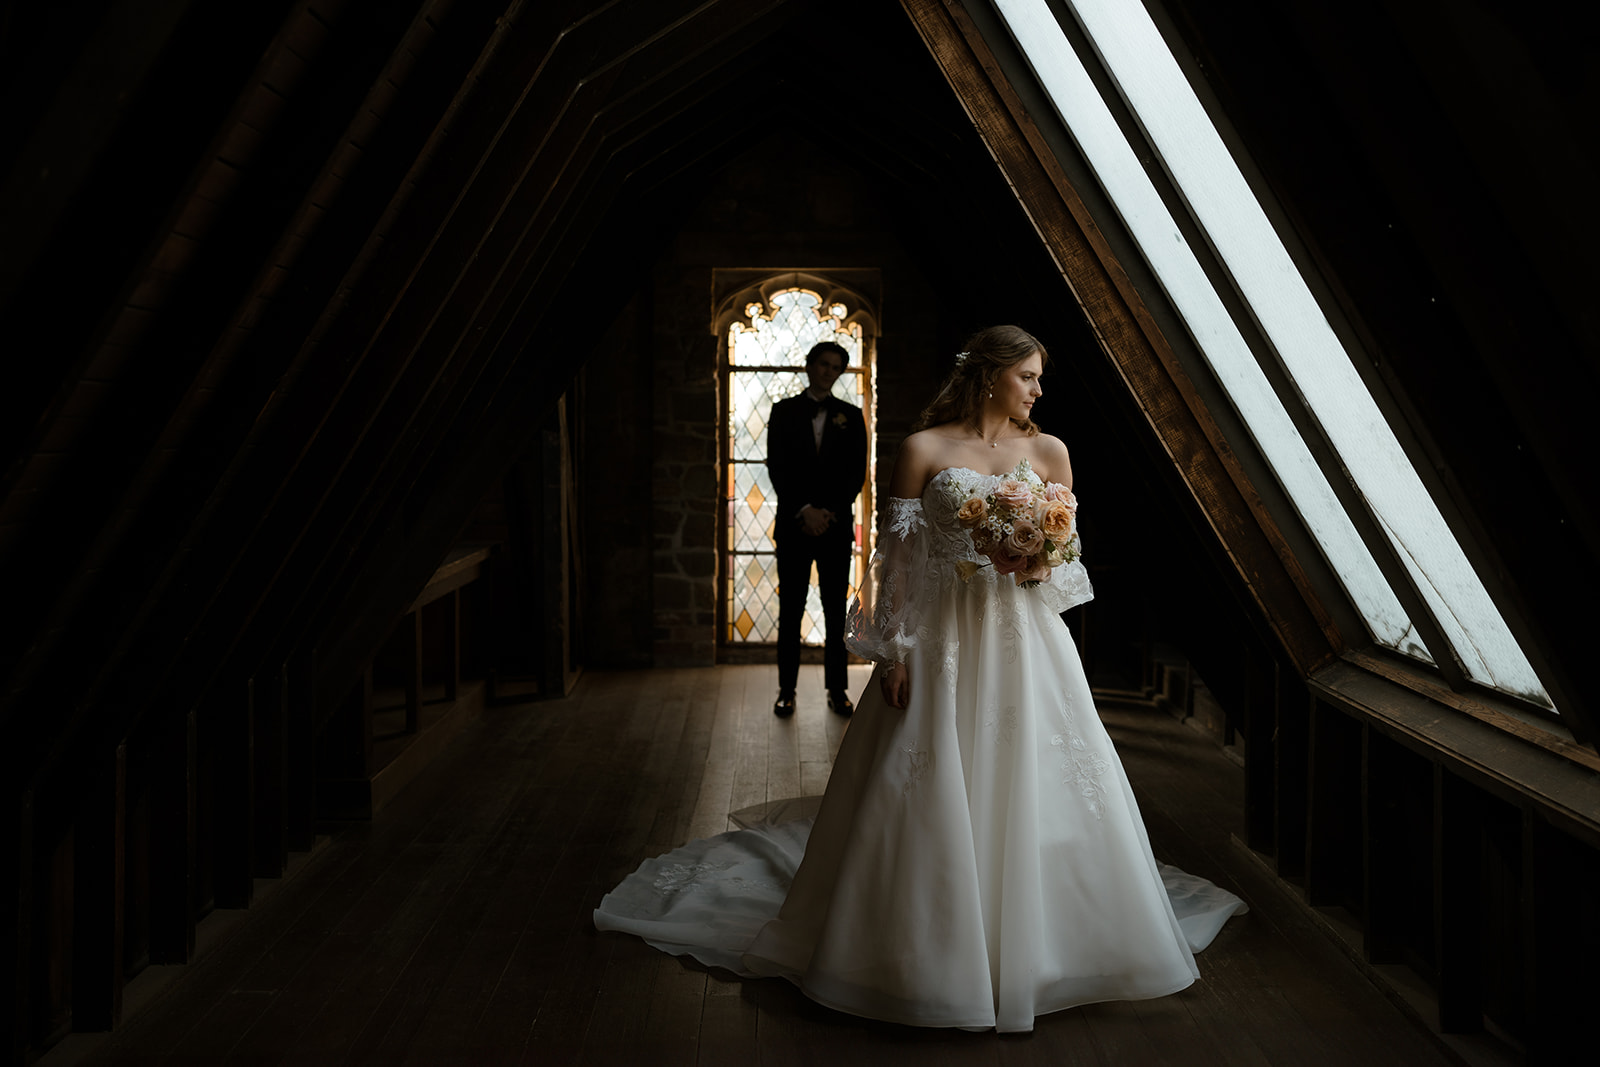 Bride in stunning gown bathed in soft light at Montsalvat, Australia